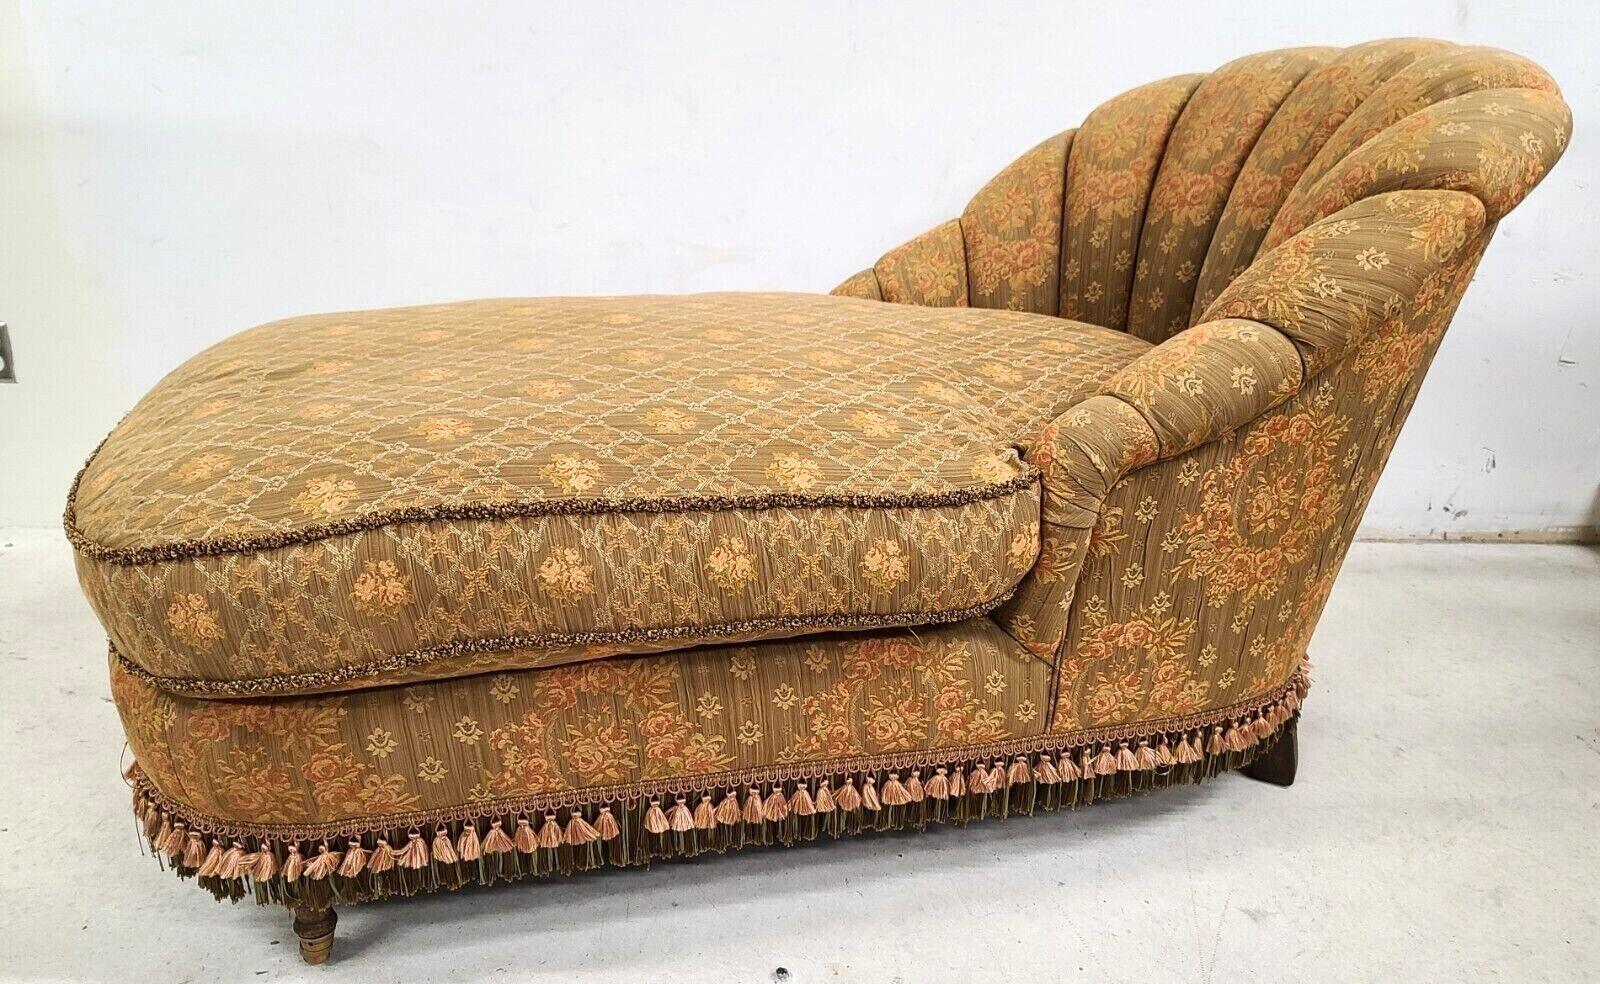 Offering one of our recent palm beach estate fine furniture acquisitions of a
Really stunning French floral roses pattern chaise lounge by Carol Hicks Bolton for E J Victor

This listing and price are for the chaise lounge shown. We have many